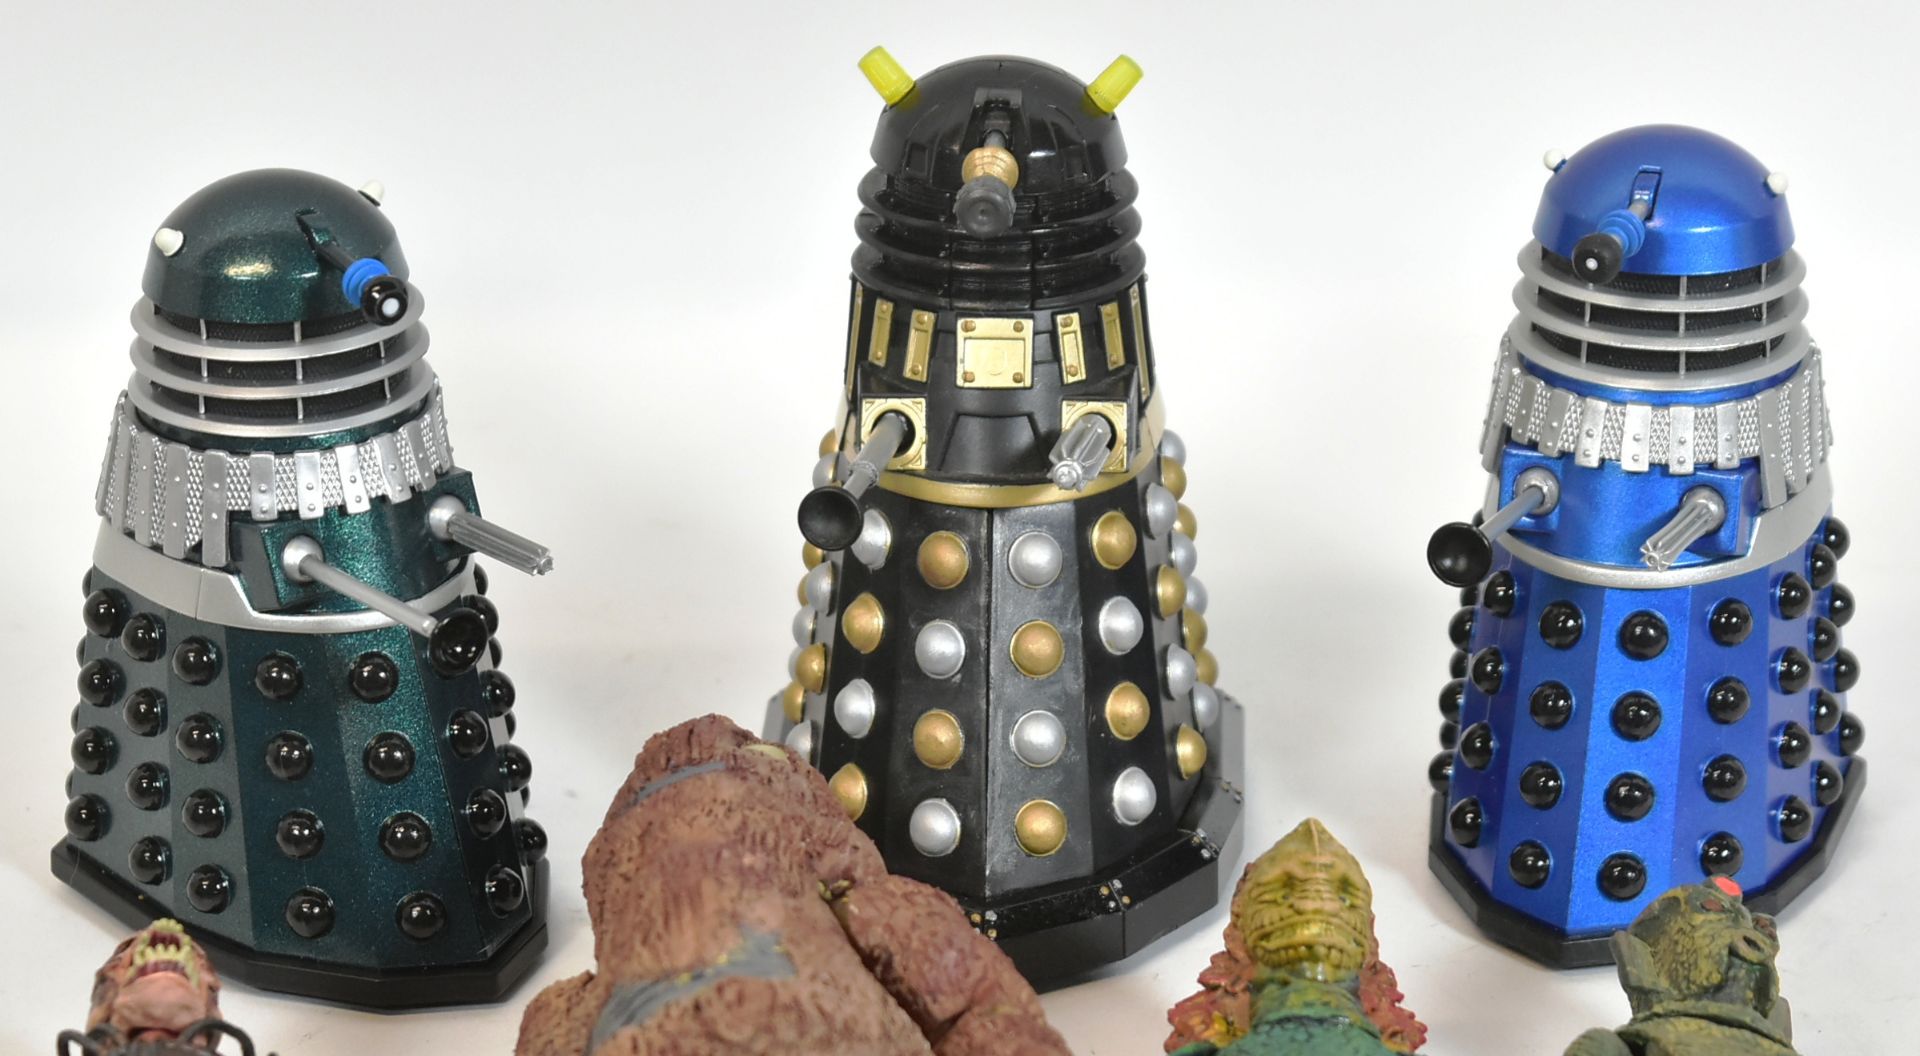 DOCTOR WHO - ACTION FIGURES - 'NEW WHO' & CLASSIC WHO - Image 2 of 5